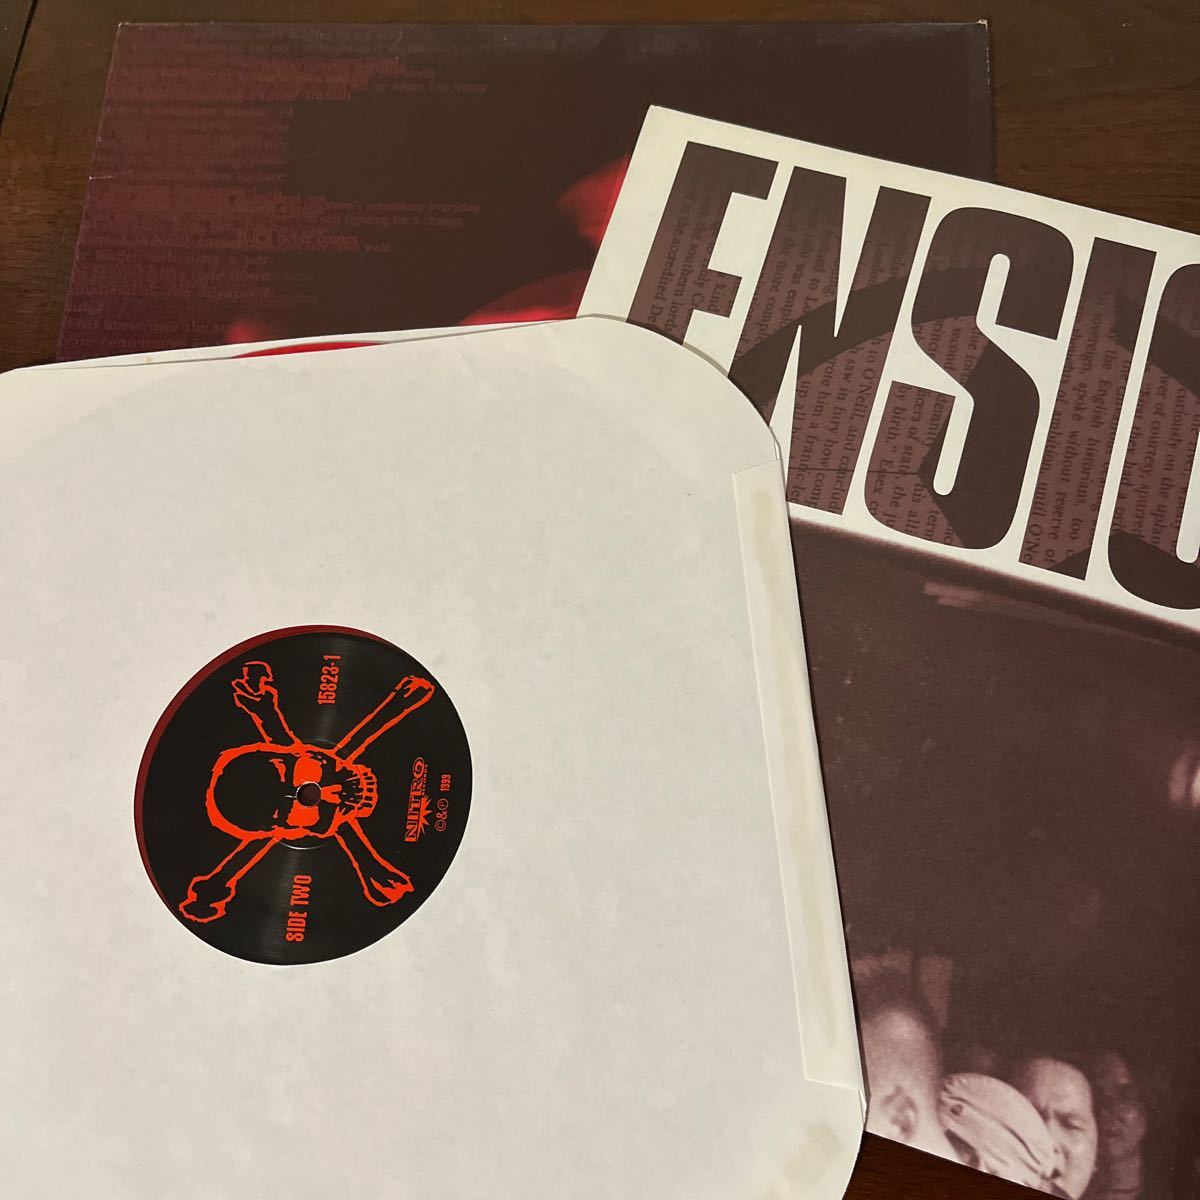 【LP】Ensign / Cast The First Stone Nitro Records 15823-1 US Orig 1999 検）Hardcore Punk Red ヴァイナル_画像3